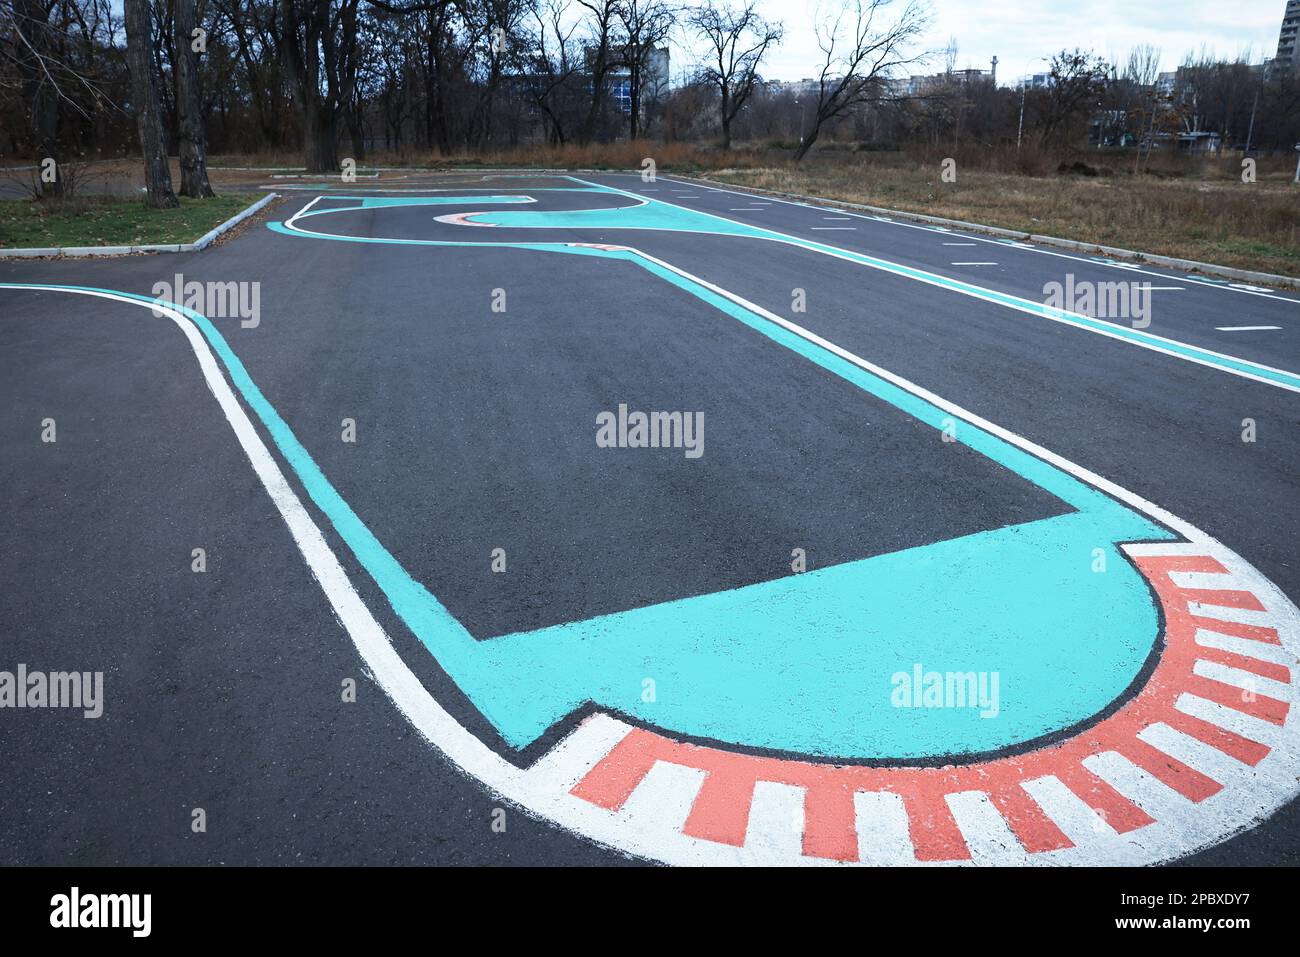 Driving school test track with marking lines for practice Stock Photo